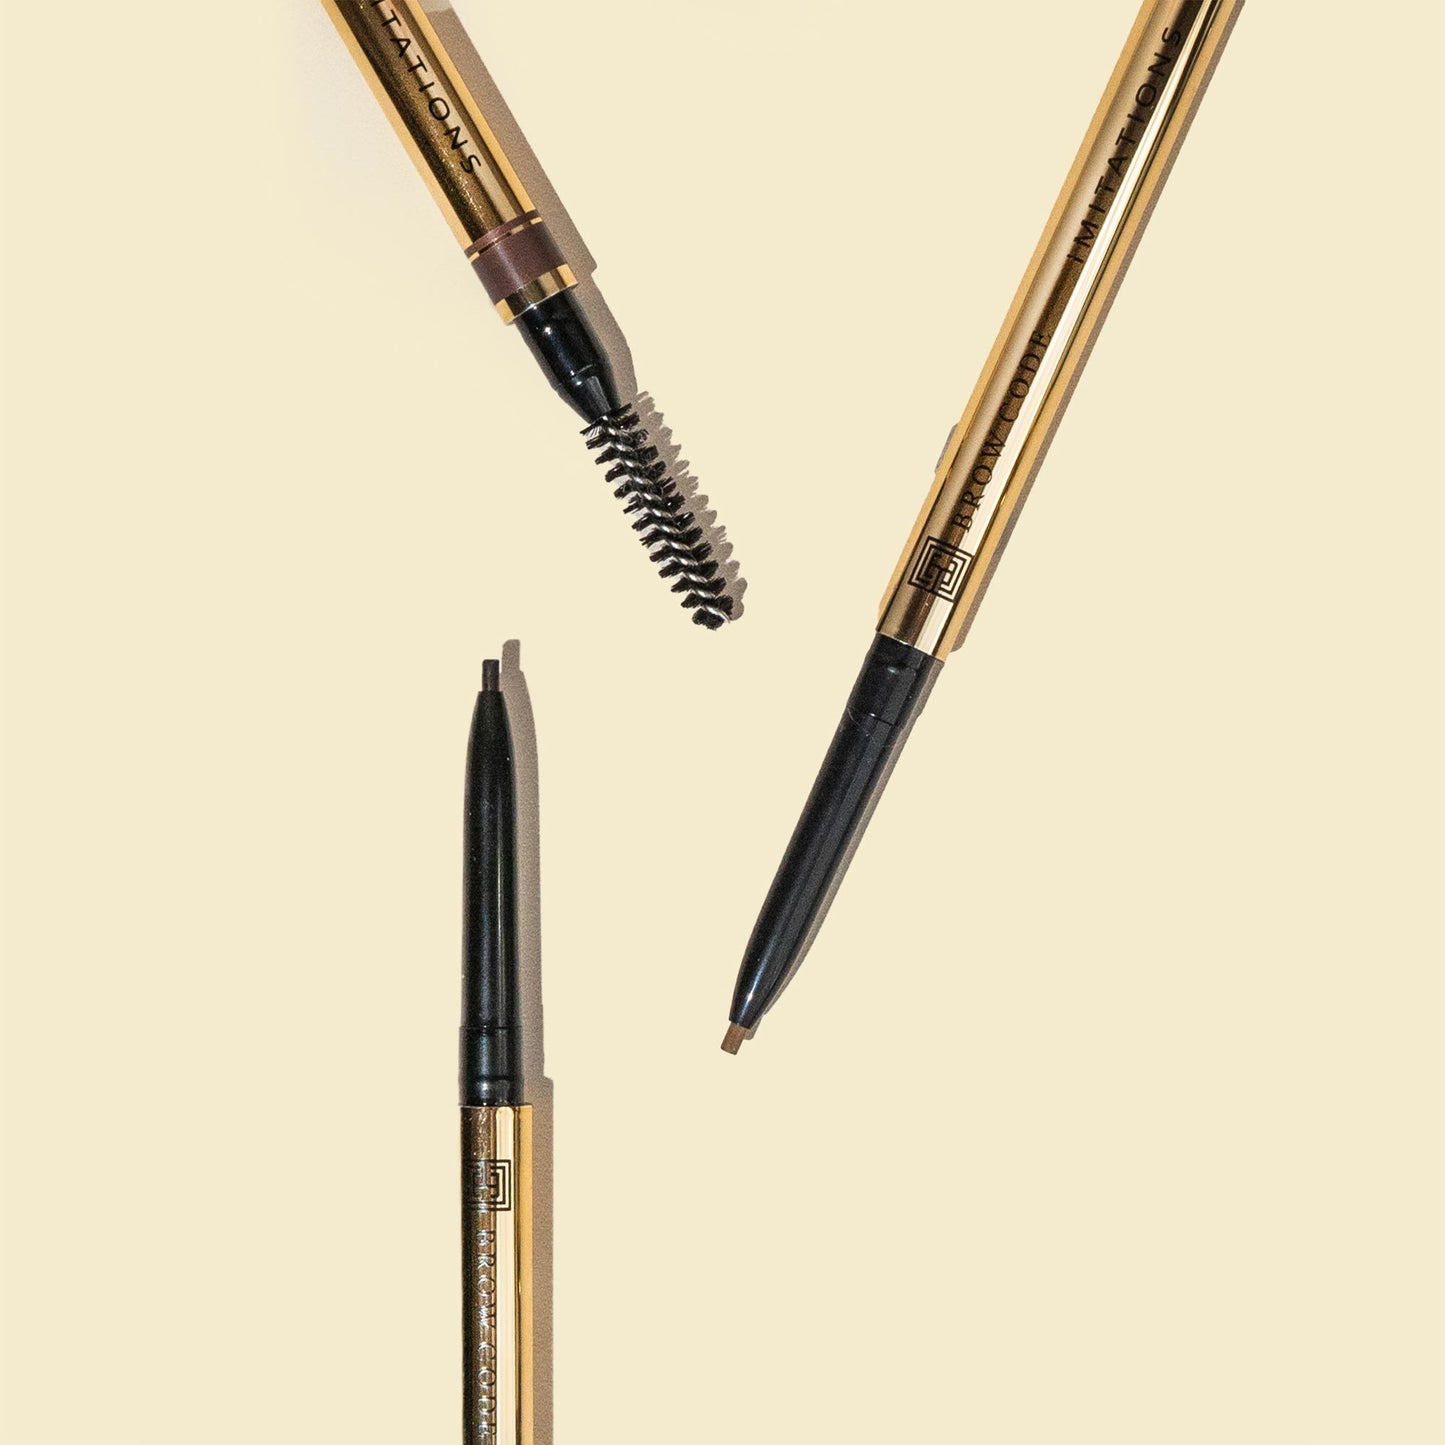 Stylised photo of a couple pencils and brush